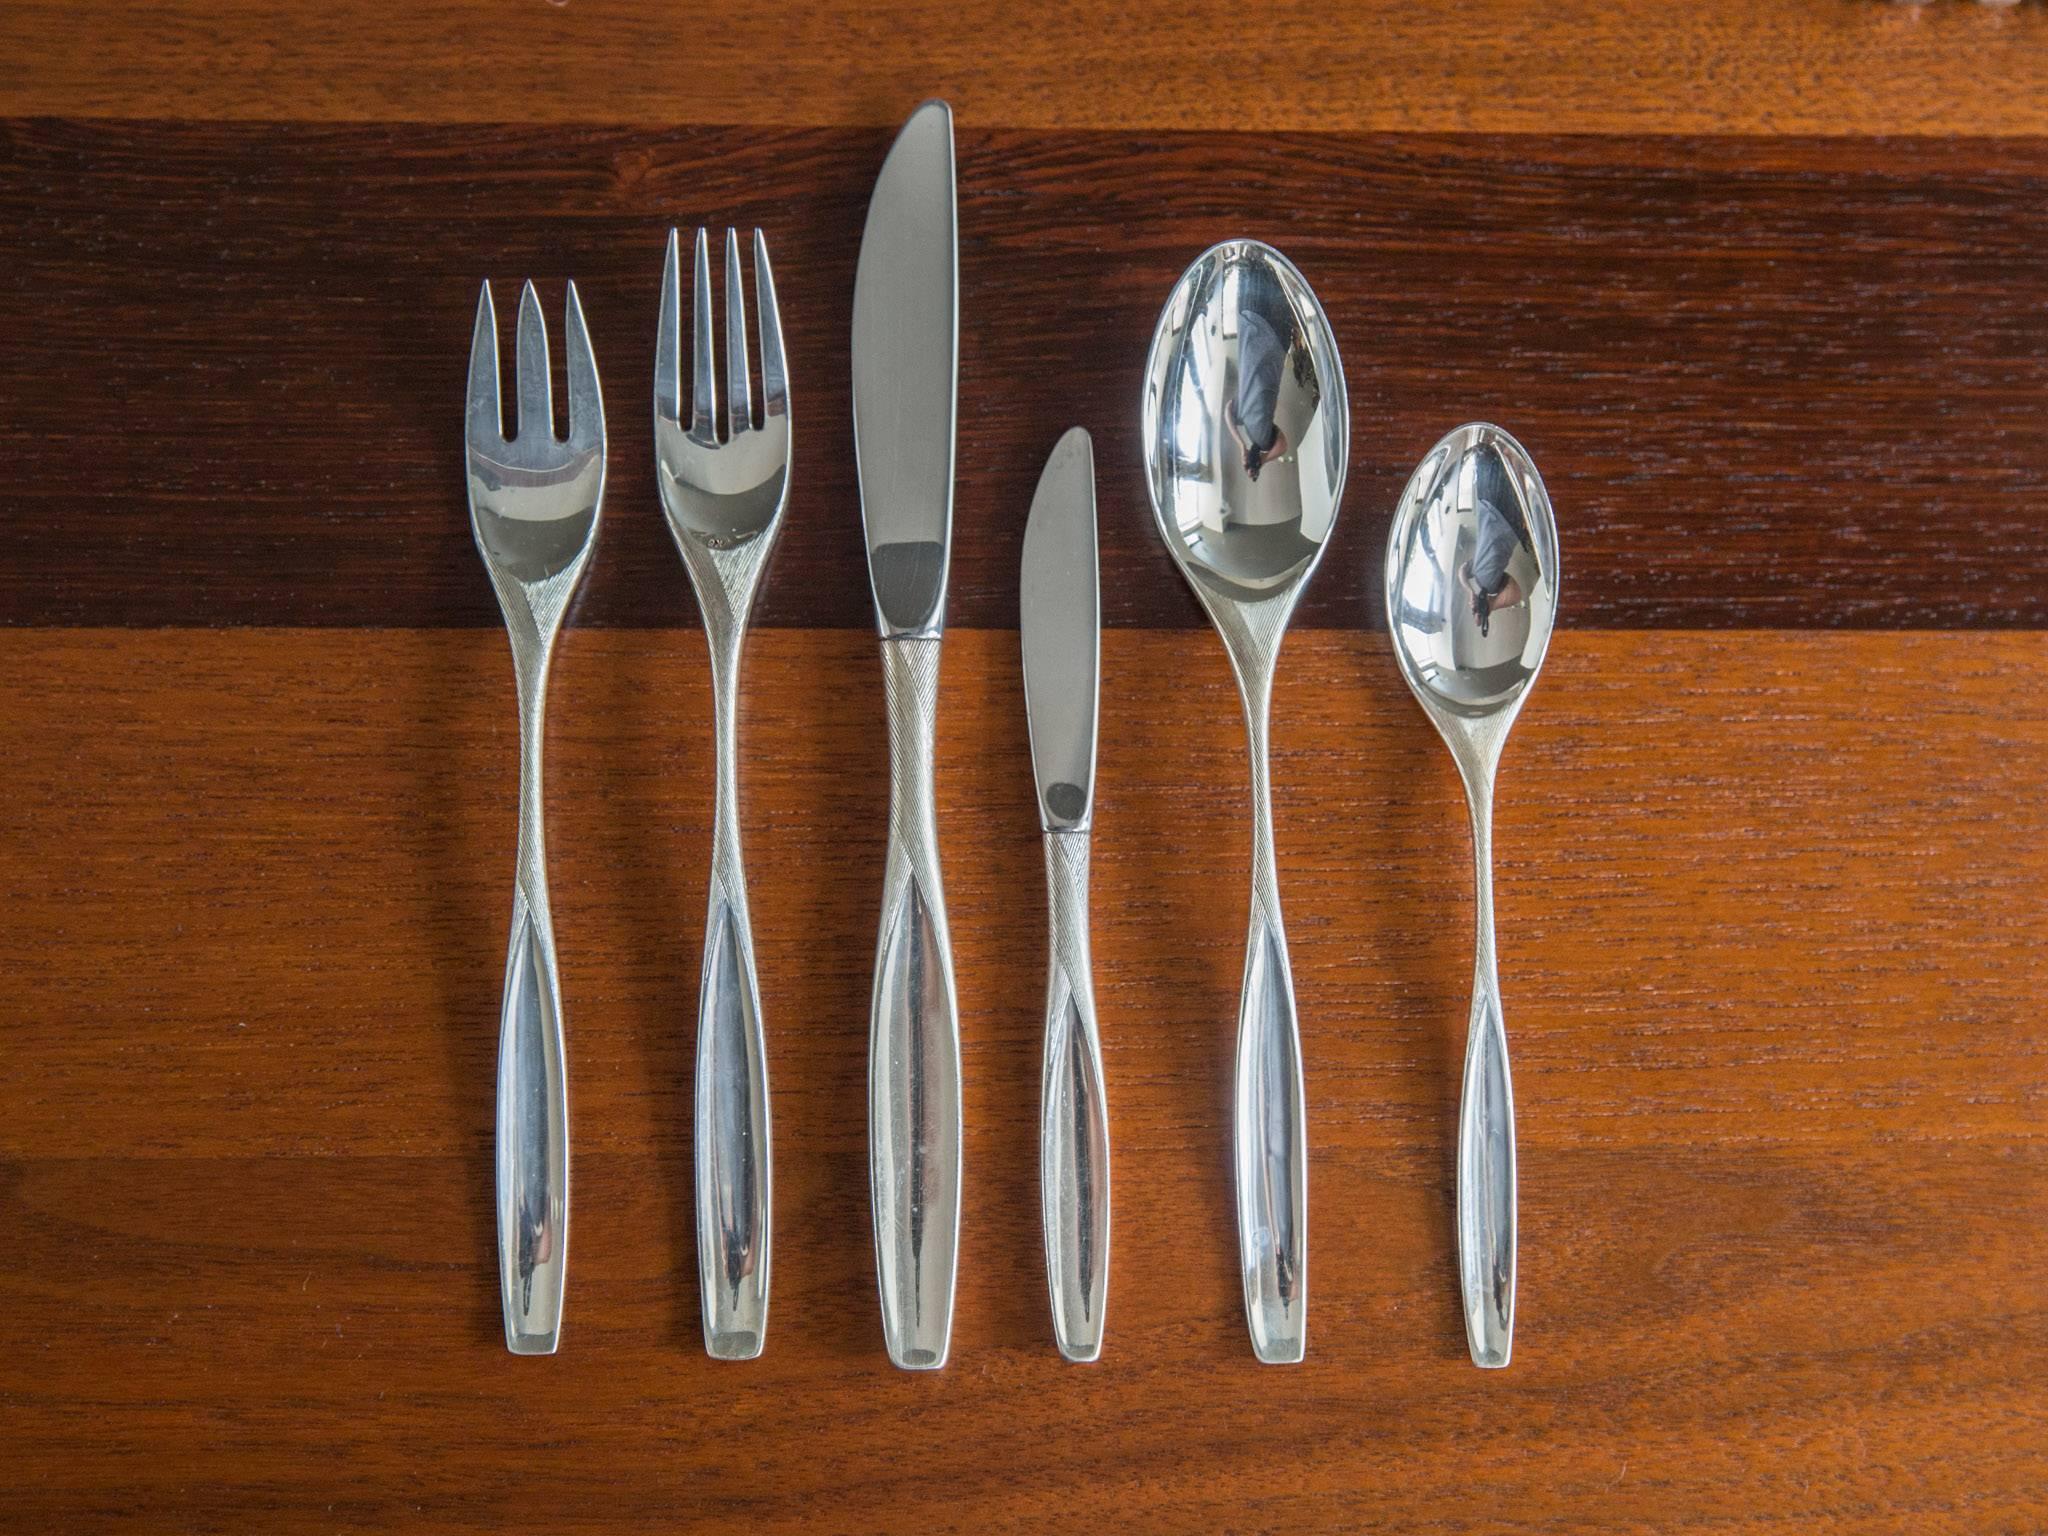 A 55-piece sterling silver flatware service in the "Ellipse" pattern by Kirk, ca. 1960s. Featuring eight 6-piece place settings which include a tea spoon, soup spoon, butter knife, dinner knife, salad/dessert fork, and dinner fork. Seven